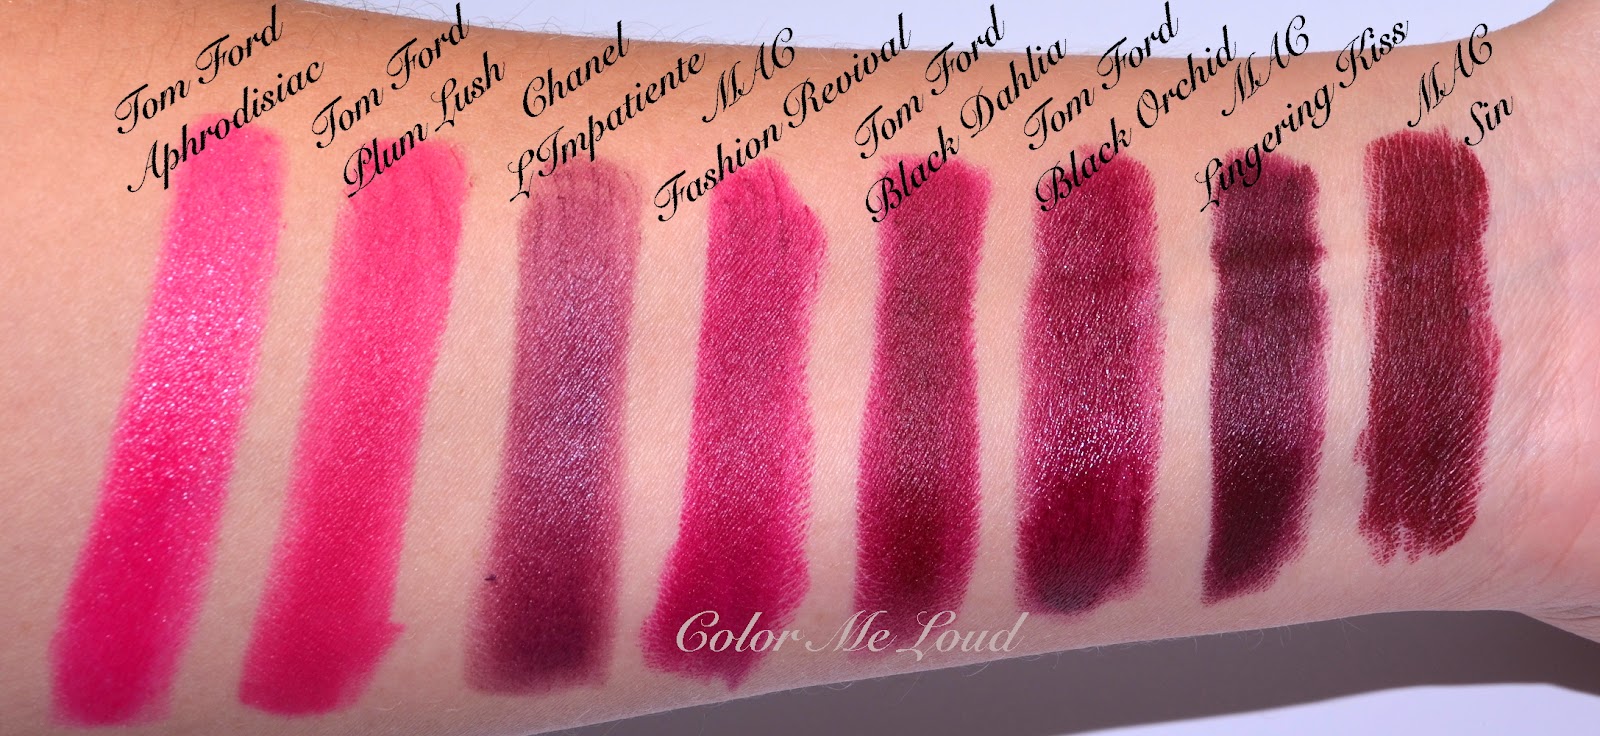 Tom Ford Color Matte #05 Lush and Black Dahlia for Holiday 2014 Collection, Review, Comparison & FOTD | Color Me Loud